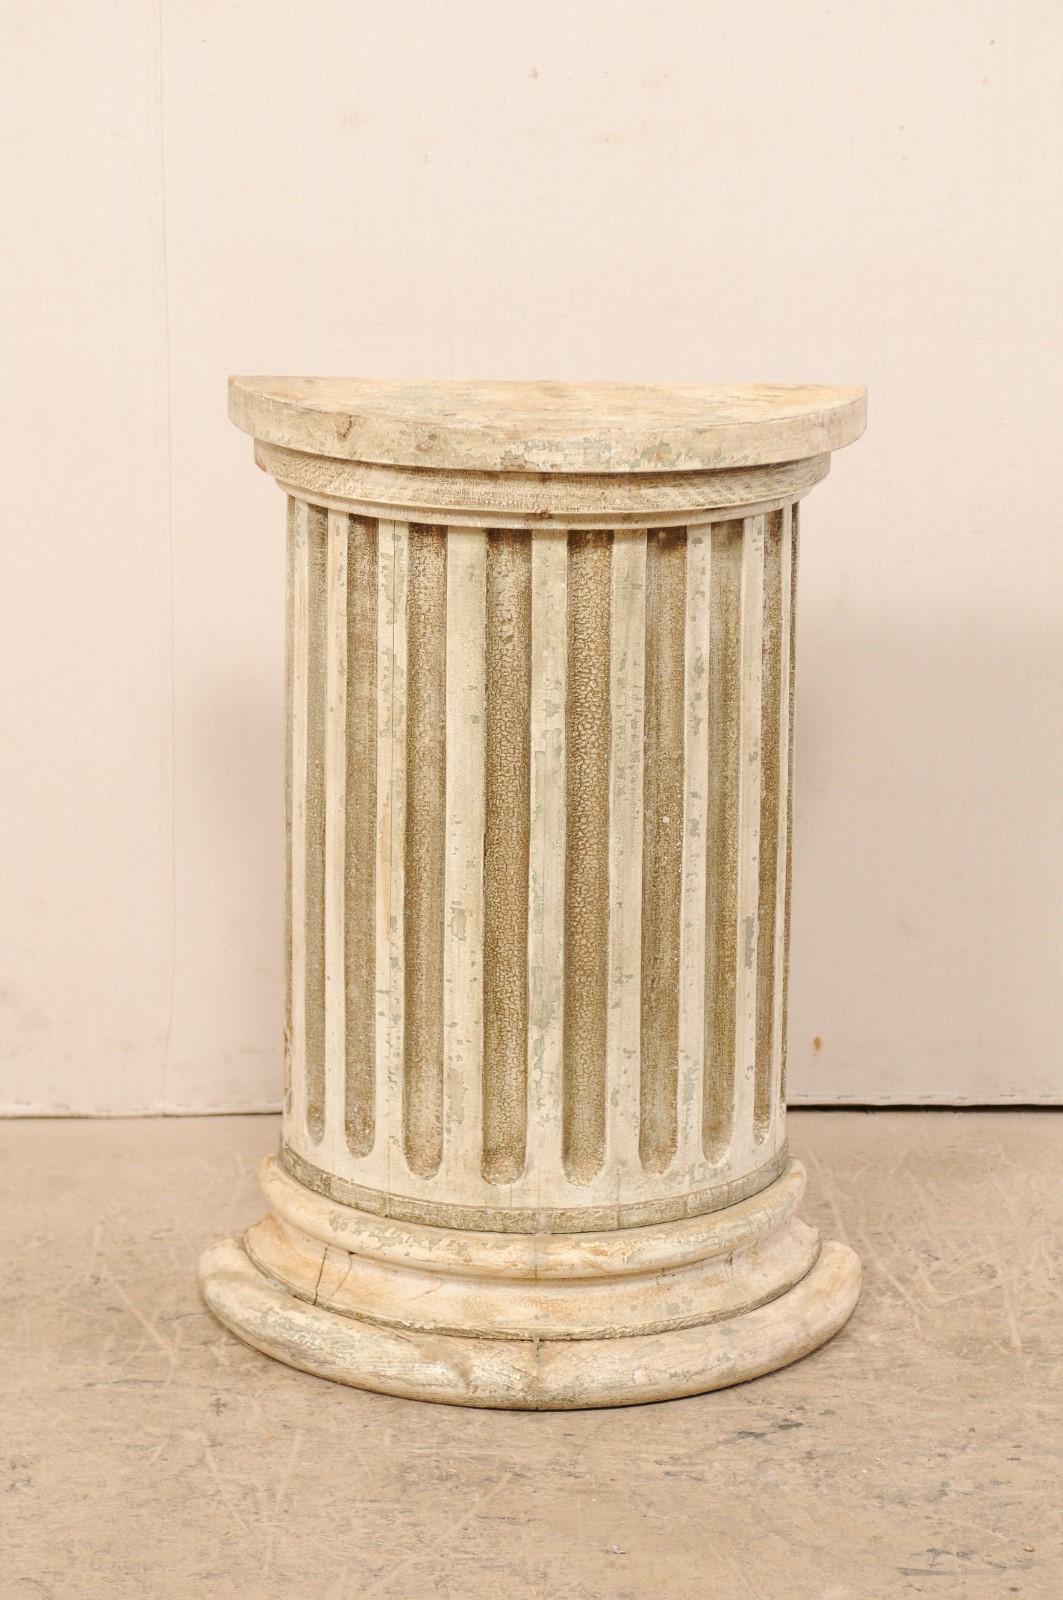 An Italian 19th century fluted half column. This antique wooden column from Italy features a half-round shaped with fluted body, rounded top and raised upon a stacked, semi-circular base. This pedestal is hallow, with flat back-side making it ideal